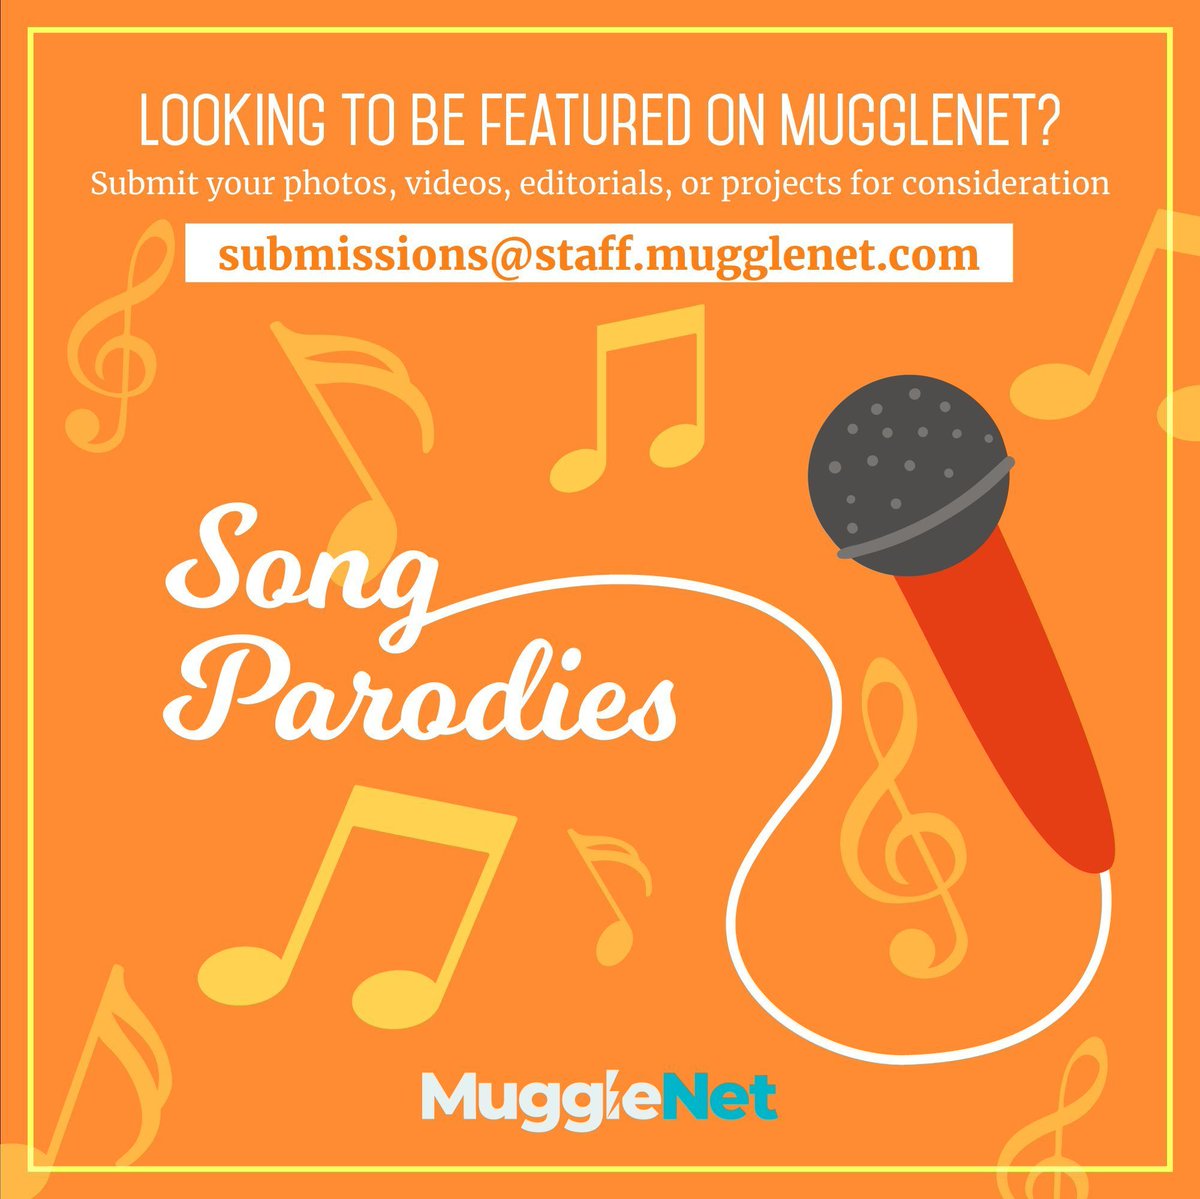 Looking to be featured on #MuggleNet? Submit your best song parodies!